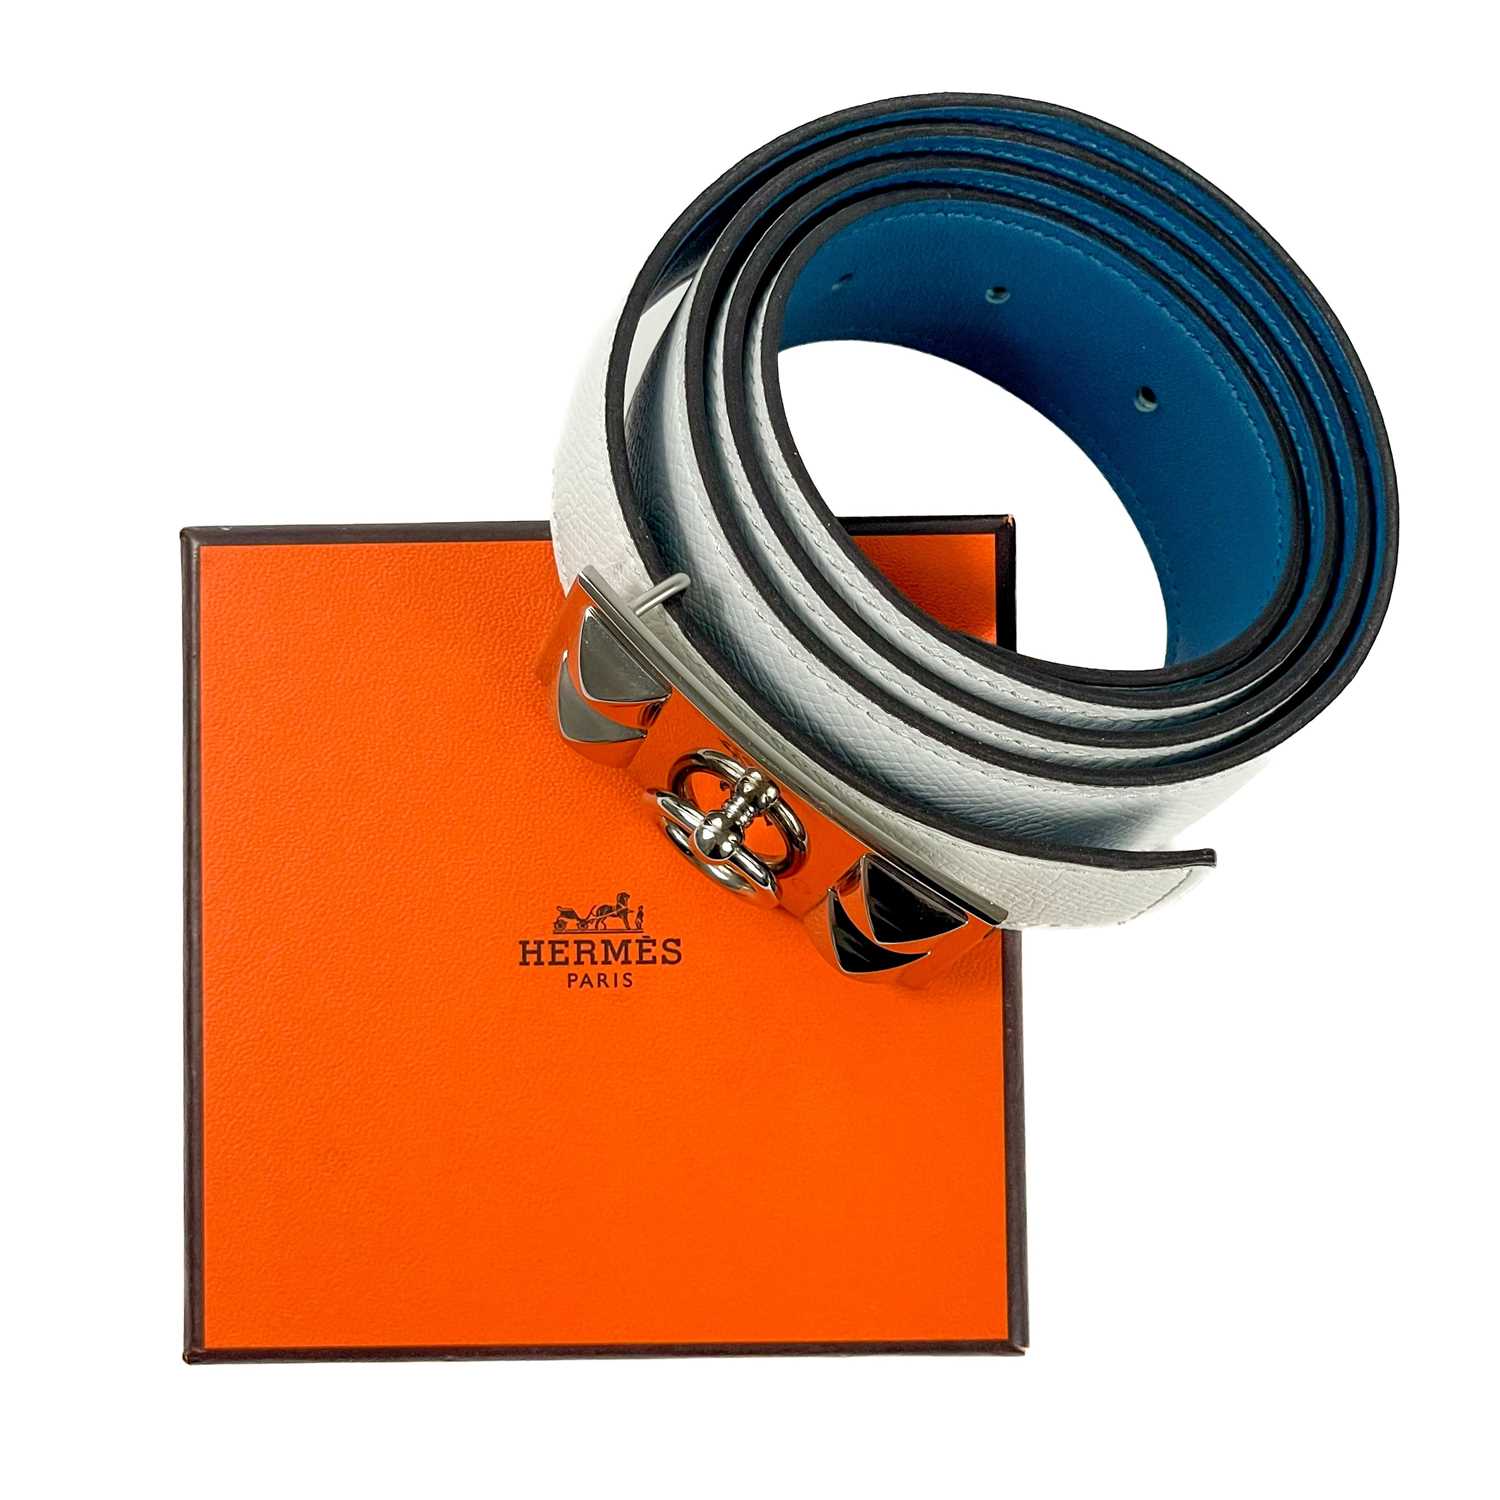 A Hermes H buckle reversible white and blue leather belt.